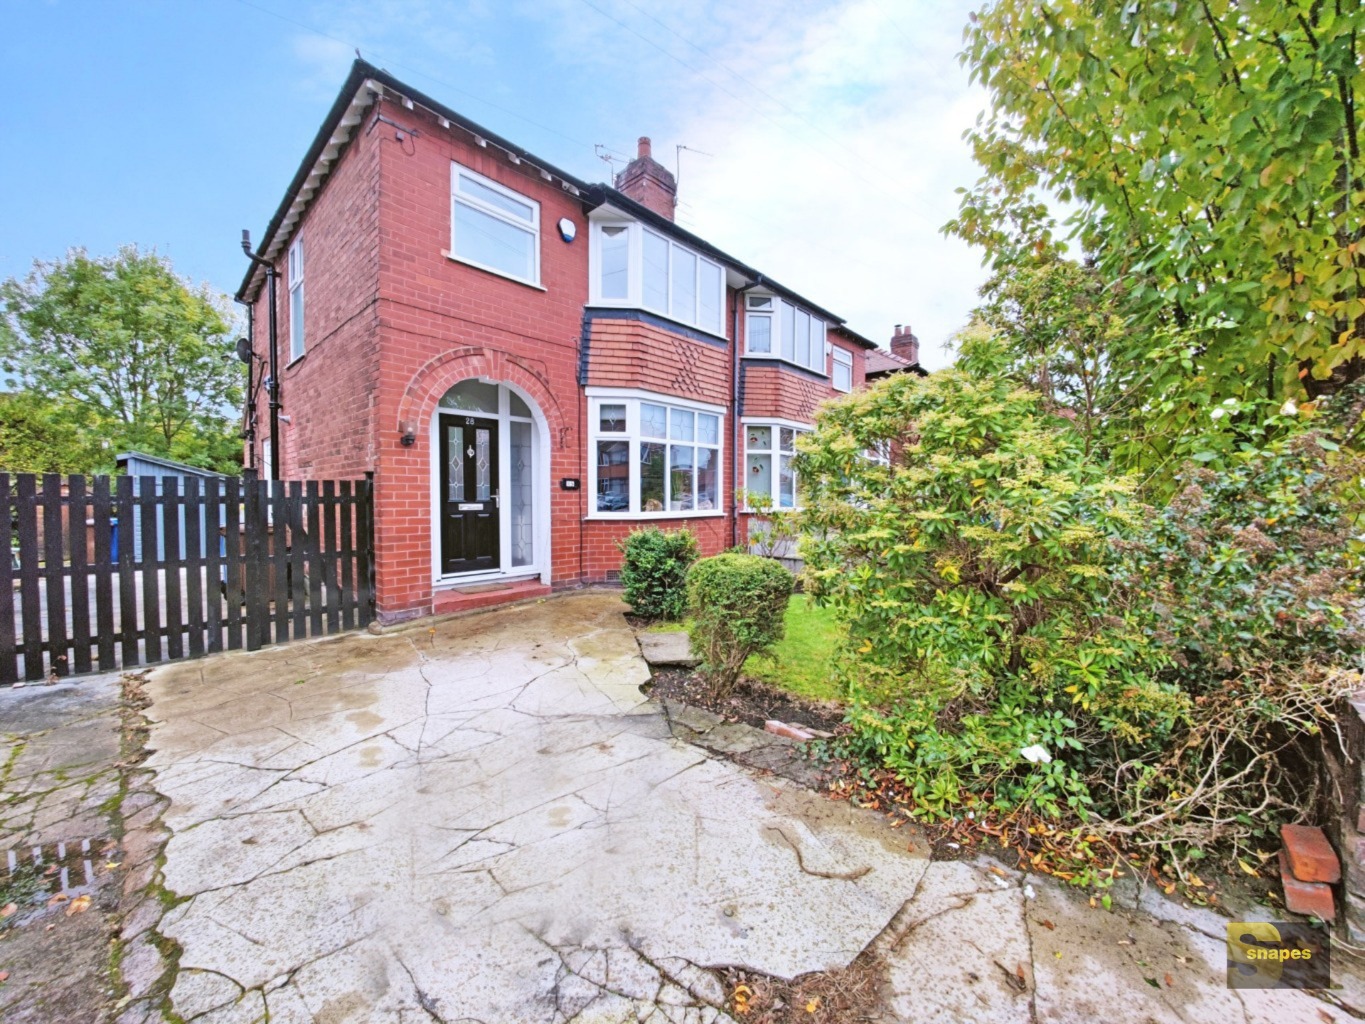 Images for Hurdsfield Road, Offerton, SK2 7ND